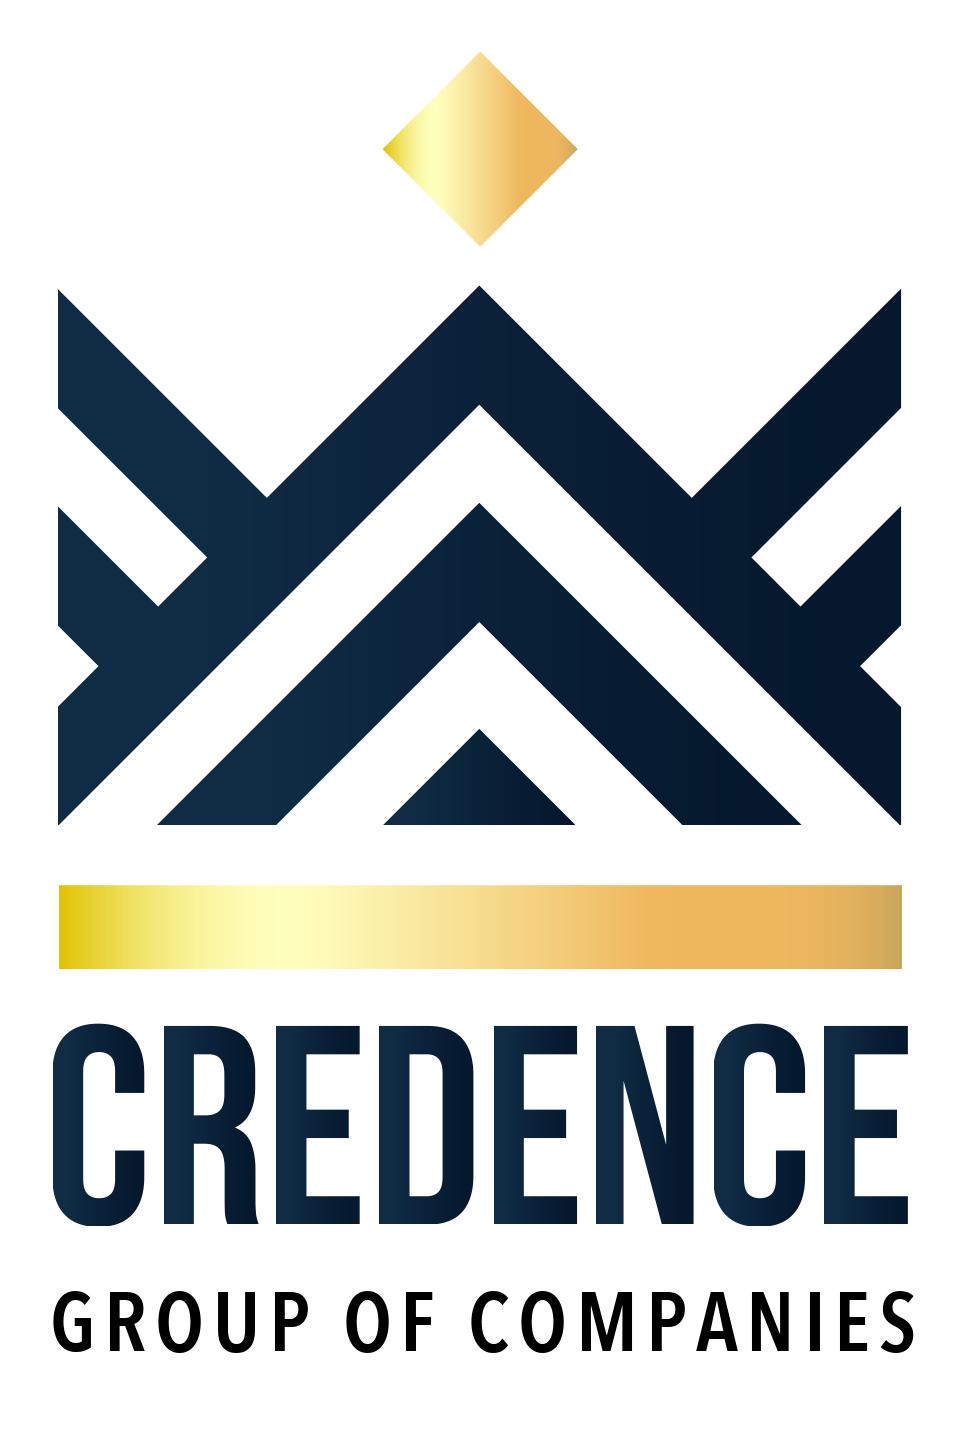 Contact 01 Credence Group